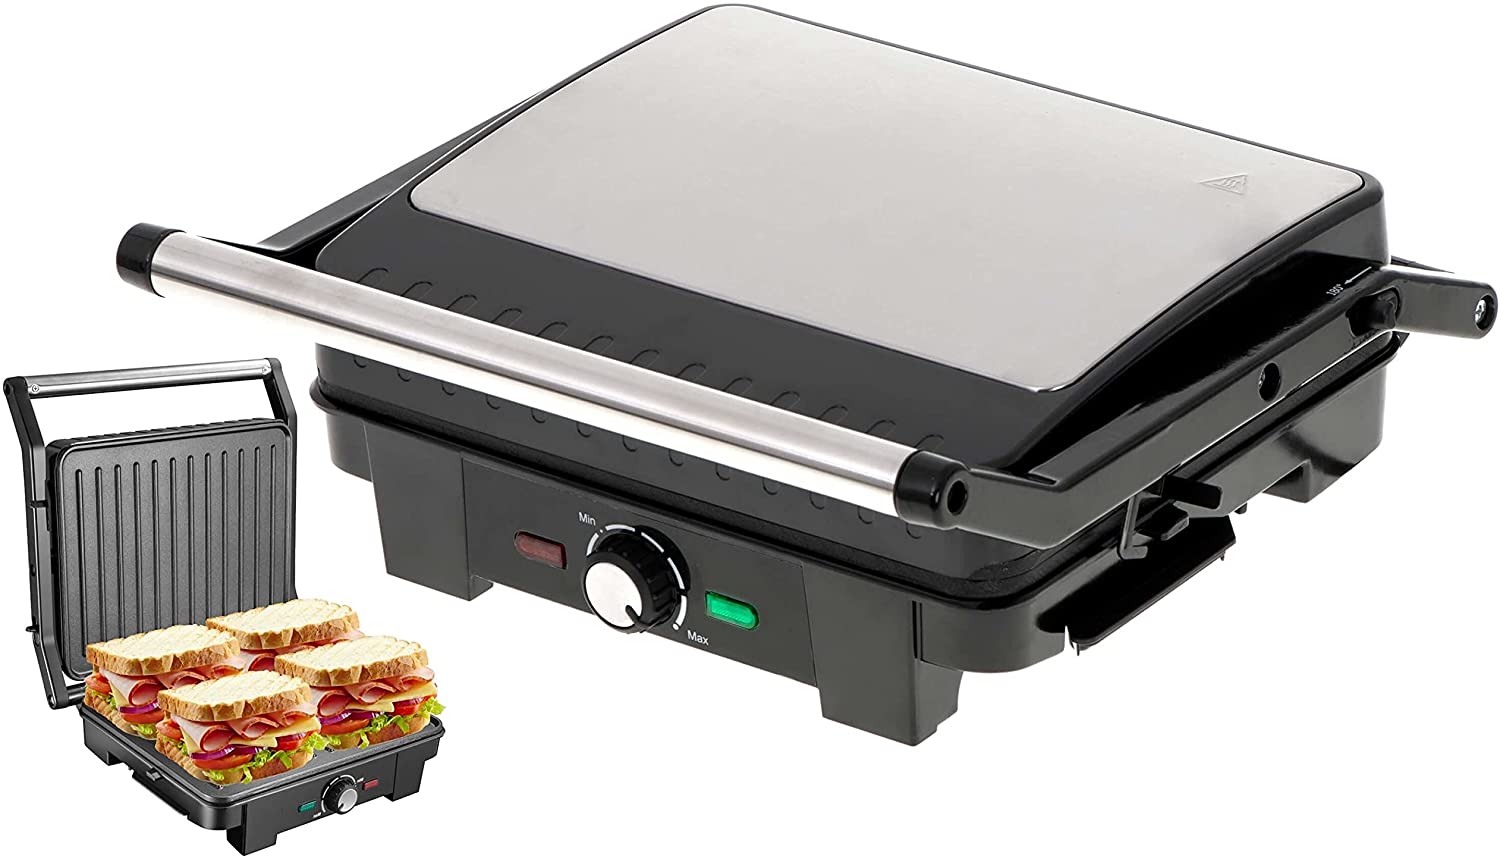 Steinborg Contact Grill 2800 Watt 180° Opening Non-Stick Coating Panini Maker Electric Table Grill Sandwich Toaster Thermostat Cool Touch Technology Grease Tray